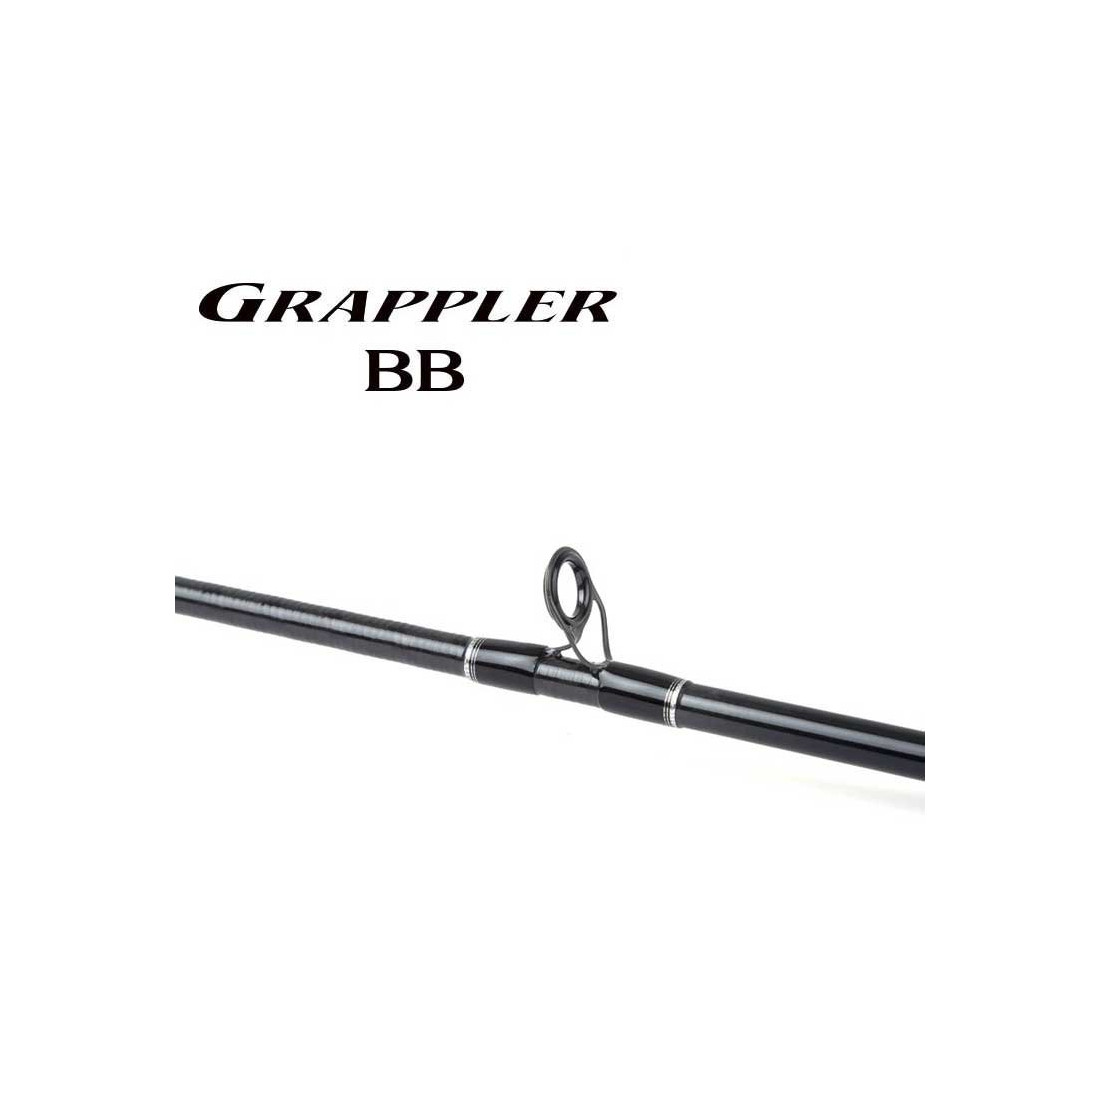 Our New Series On Sale Spinning Rods Shimano Grappler BB Type J S